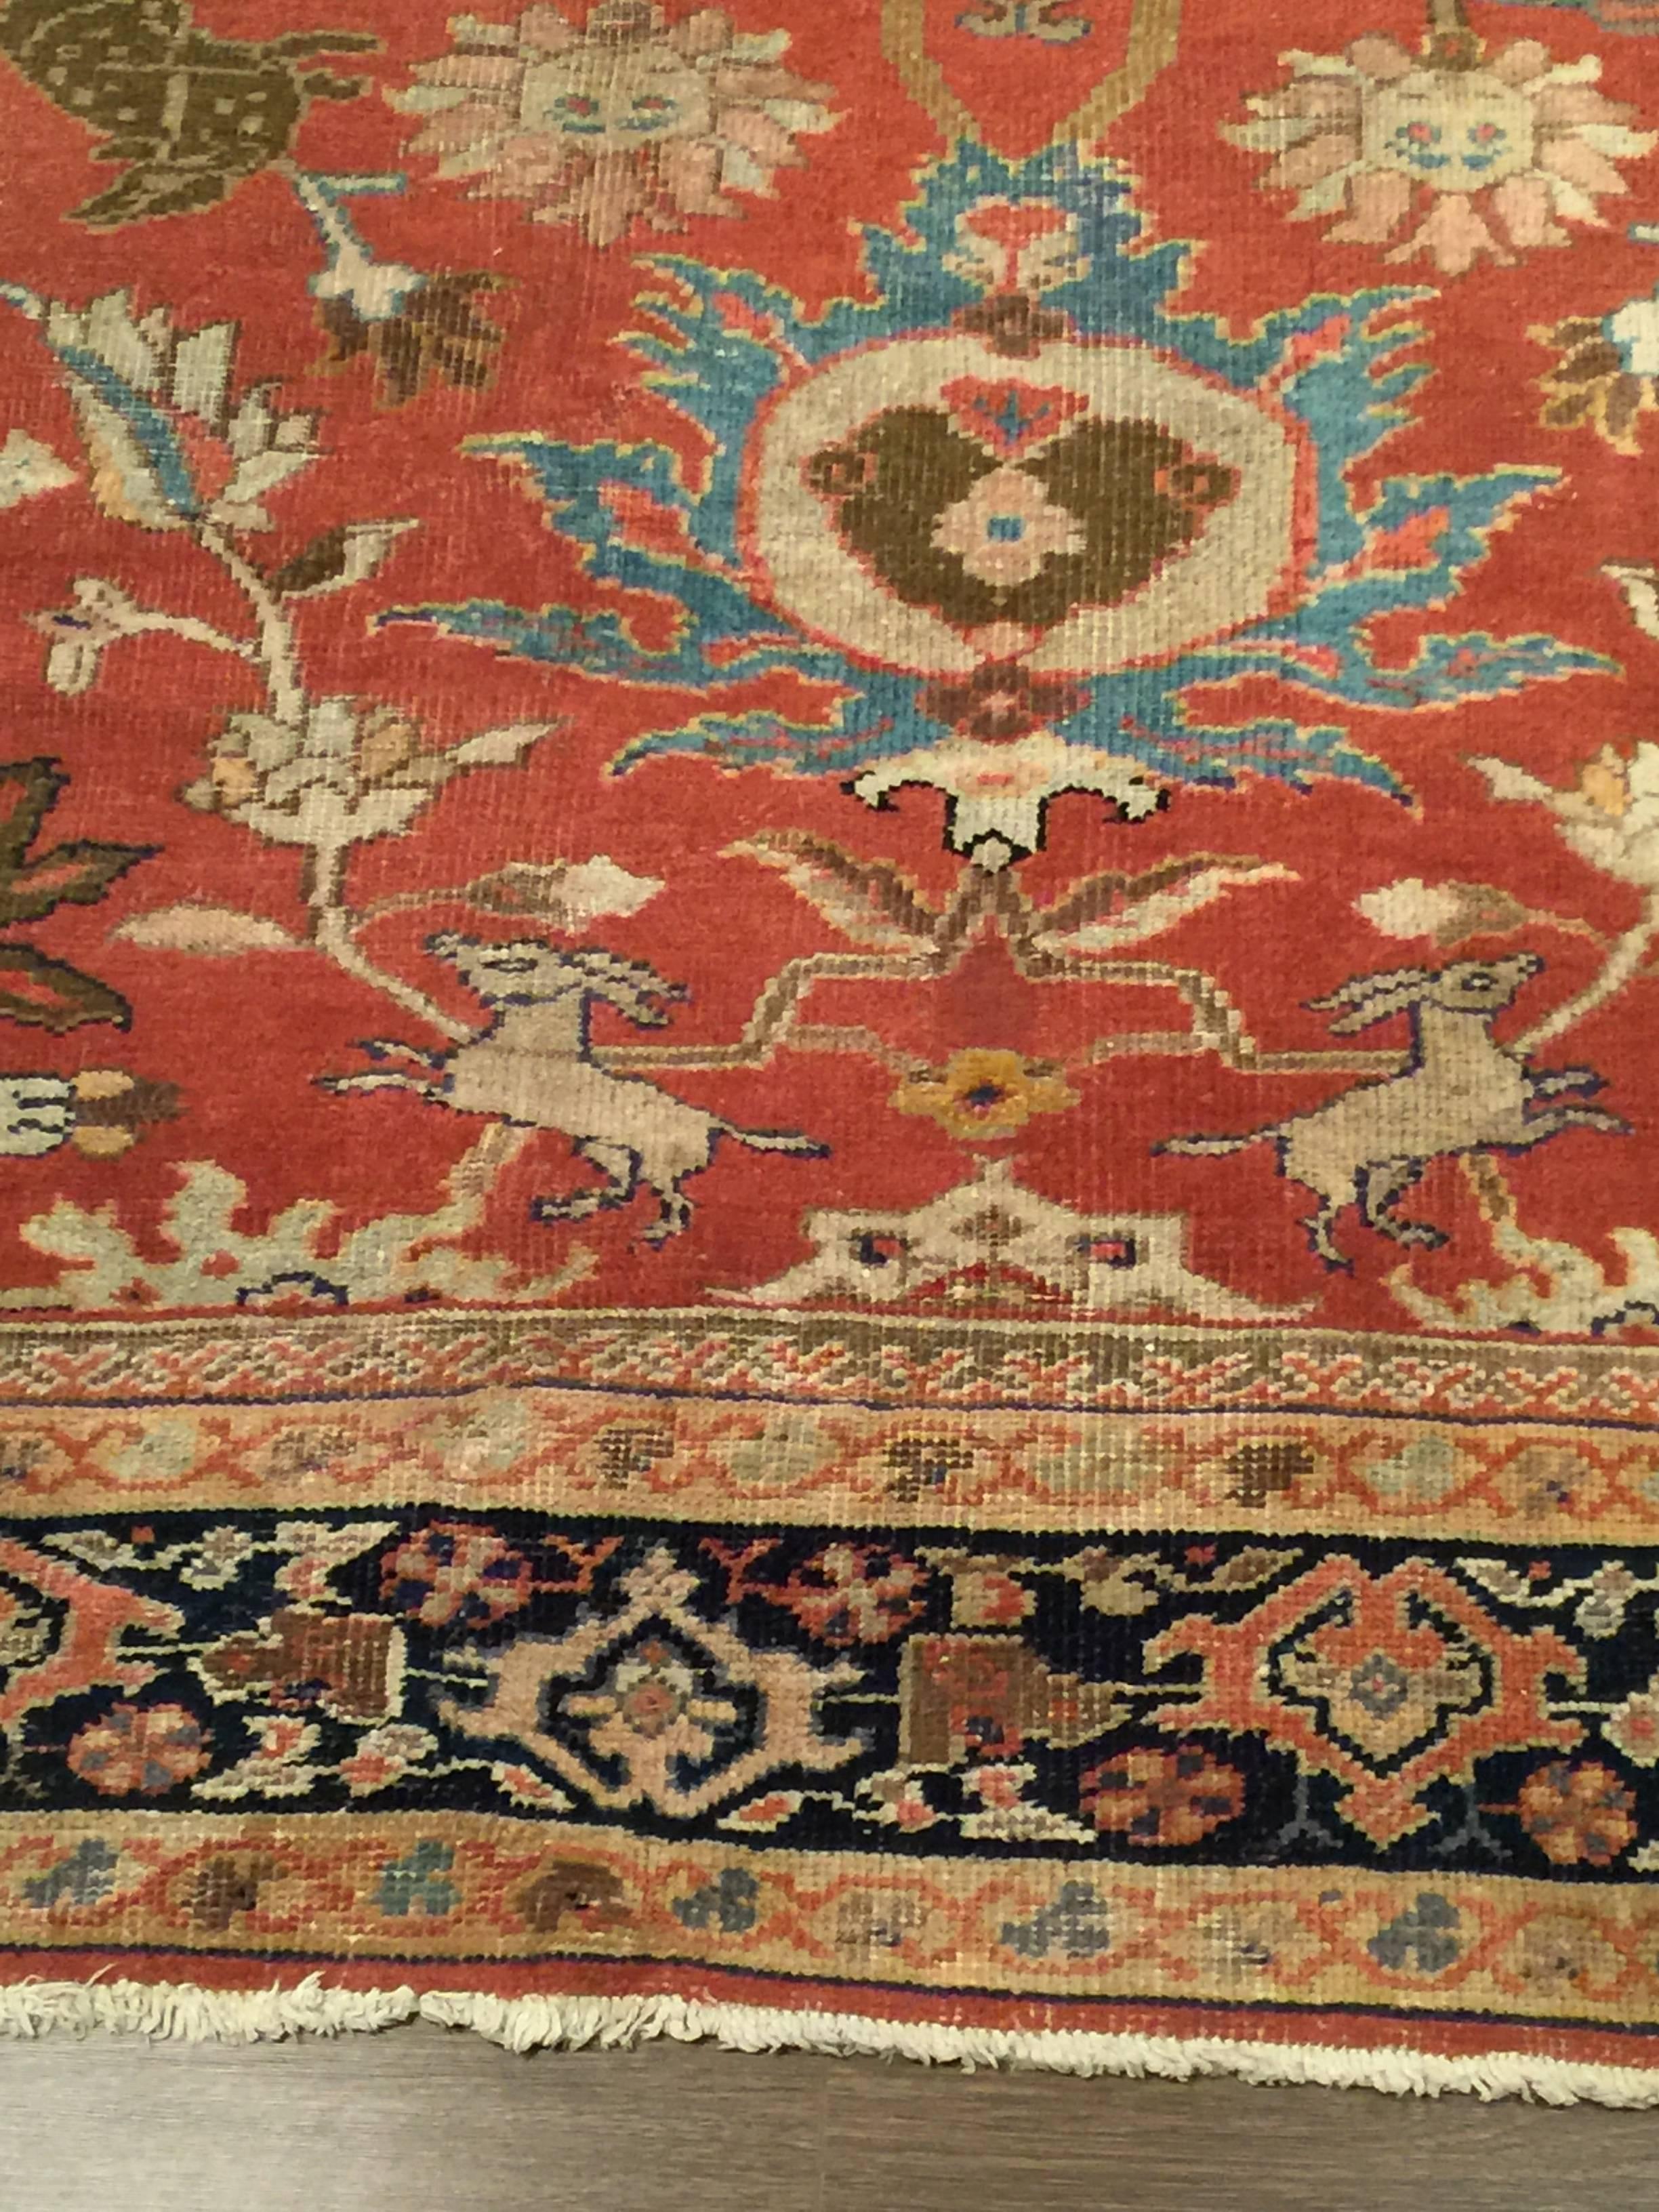 Antique Persian rust Ziegler Sultanabad rug, circa 1880 8'5x11'10. The Ziegler Company from Manchester was one of the earliest dealers and manufacturers of carpets operating in Persia and commissioning these carpets. They were active in Persia